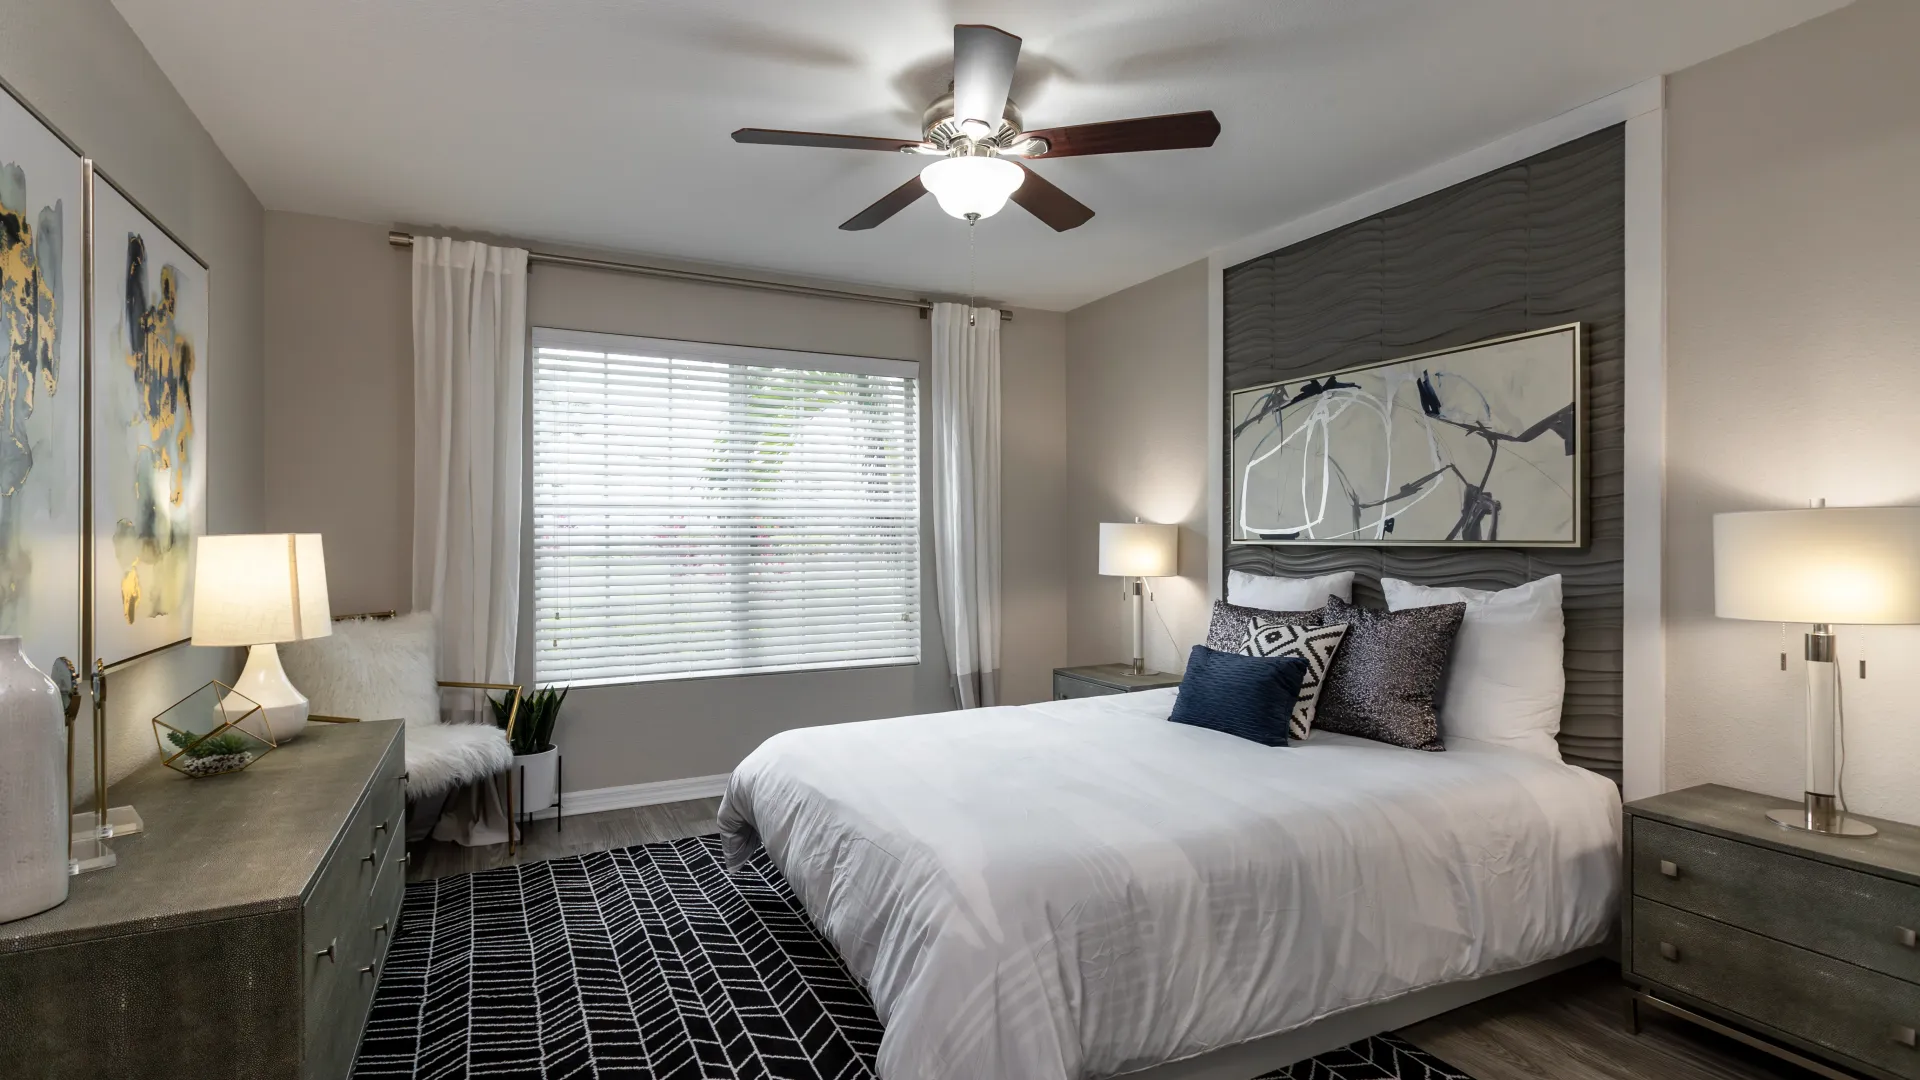 A lavish master bedroom boasting ample square footage with a vast window and generous space for a king-size bed, featuring a breezy ceiling fan.